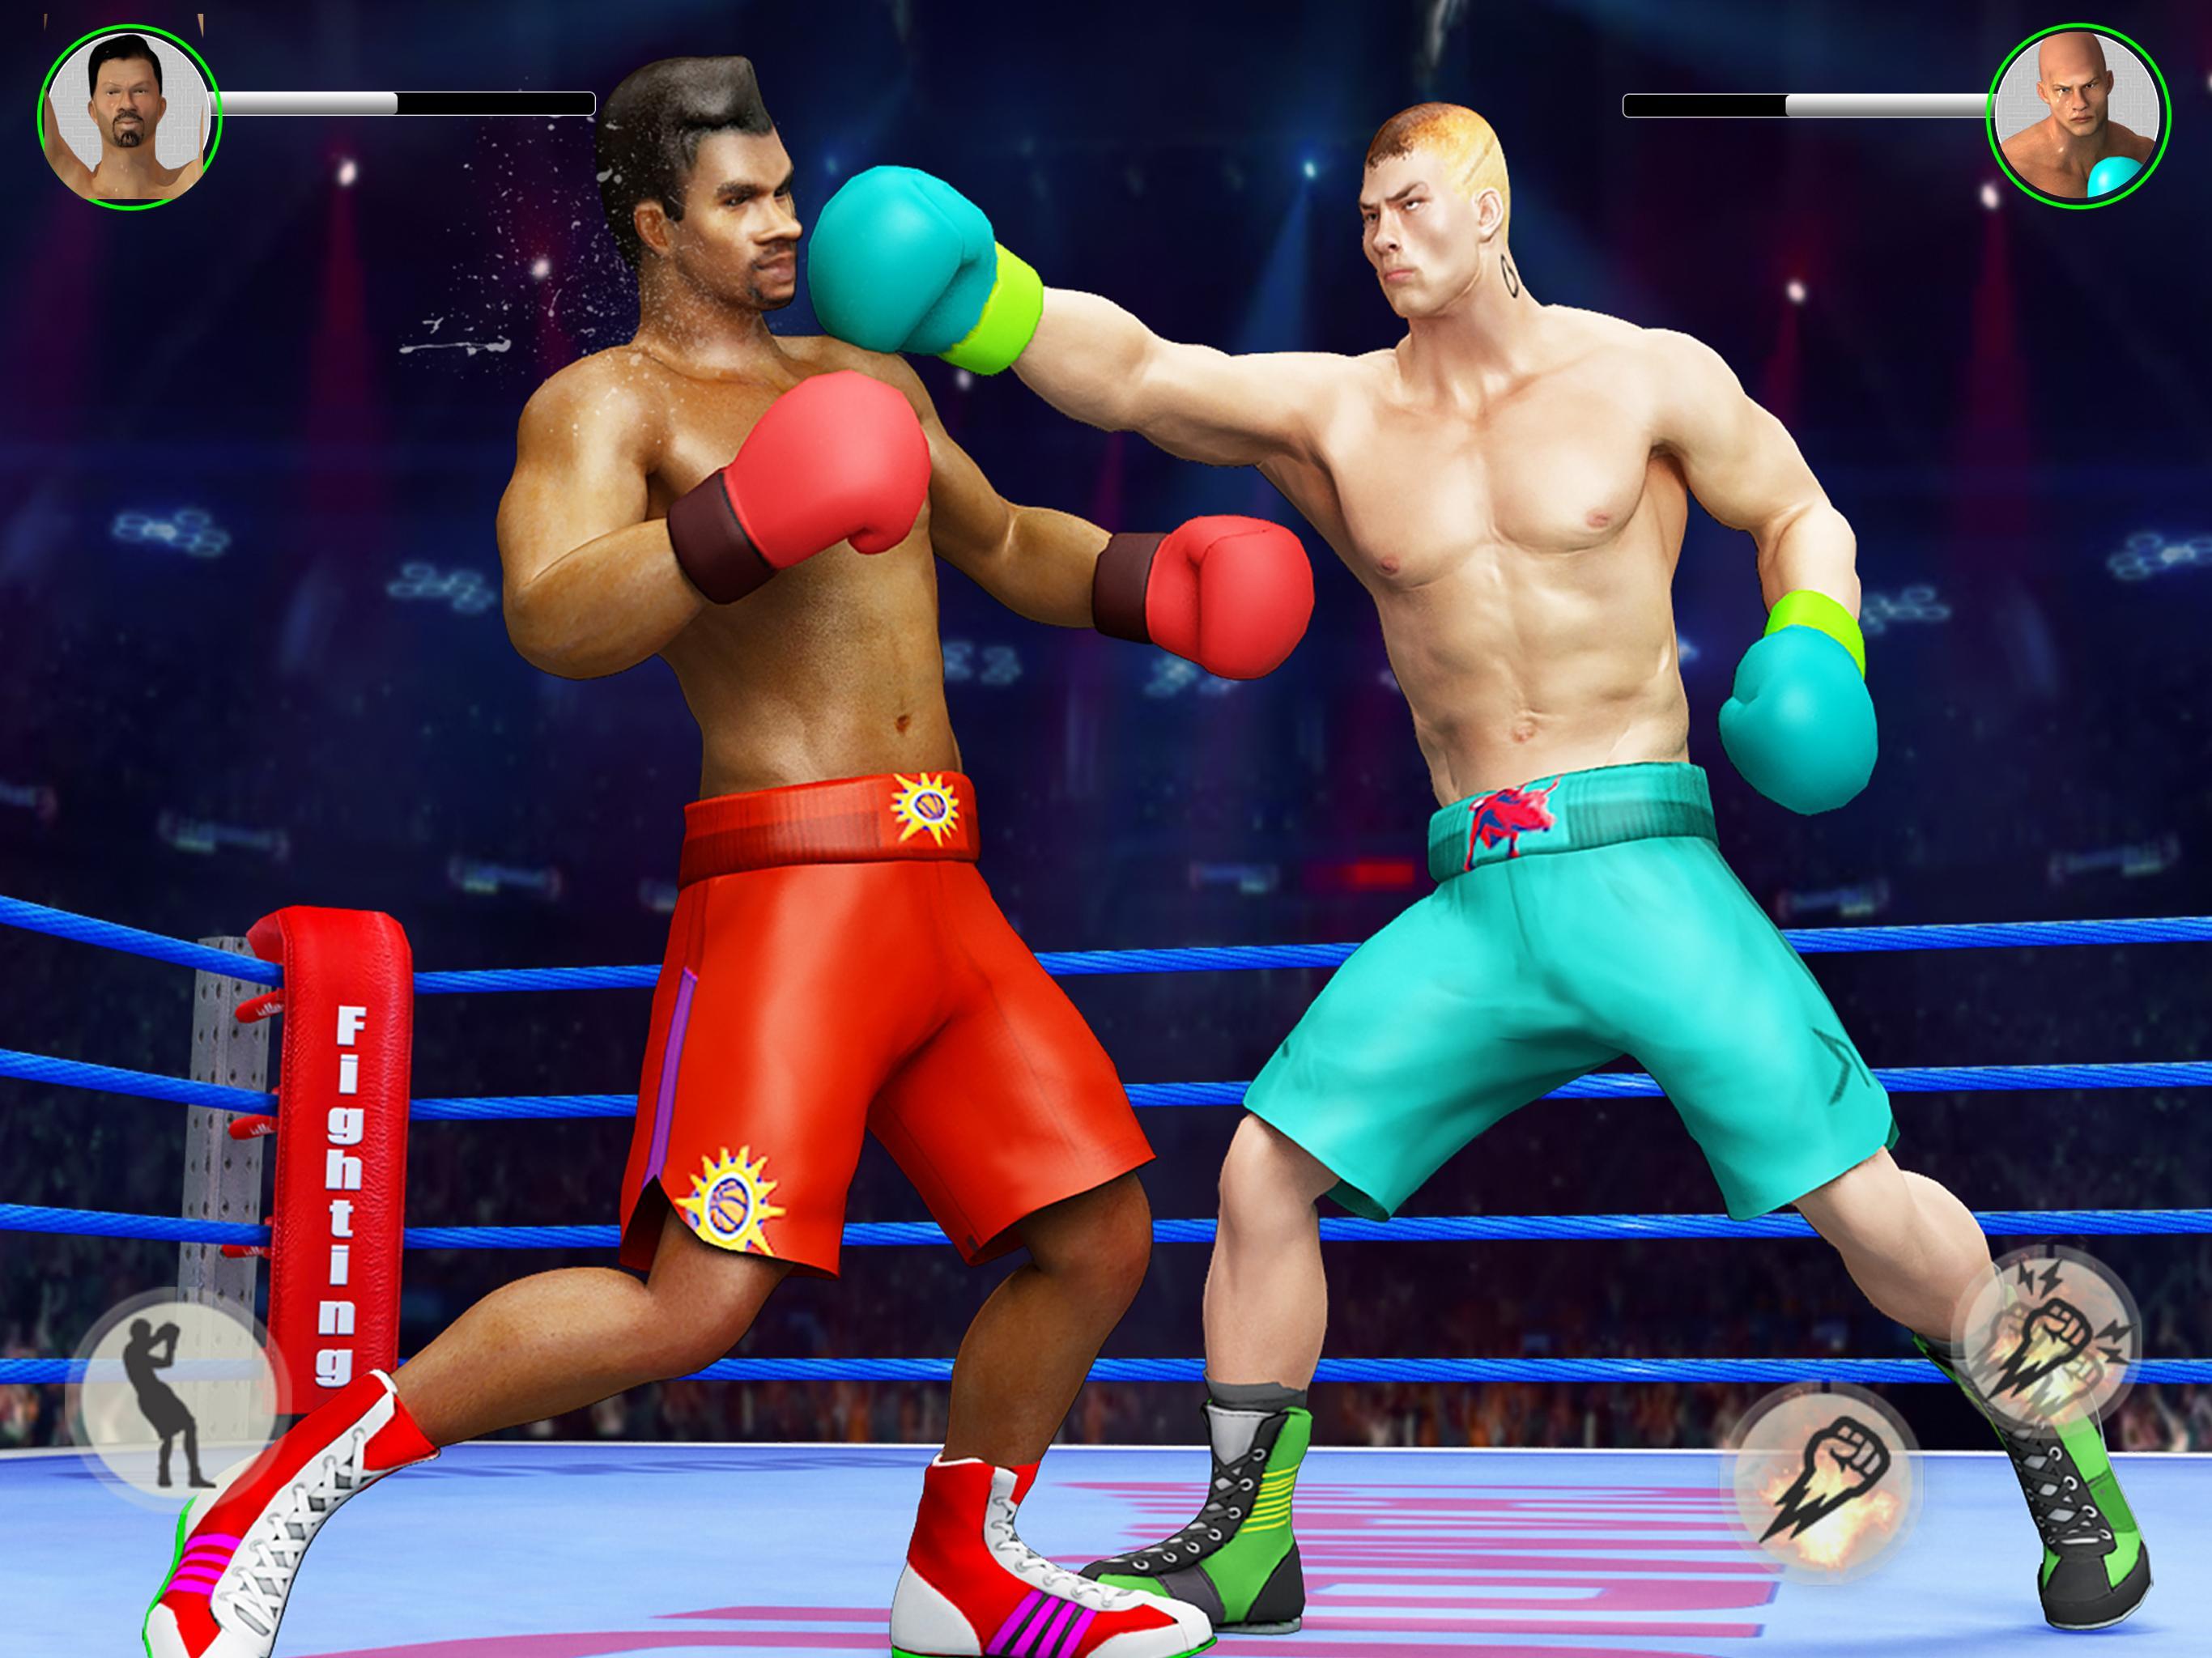 Untilited boxing game. Бокс игра. Игра боксер. Игра про боксера Punch. Игра про бокс на андроид.